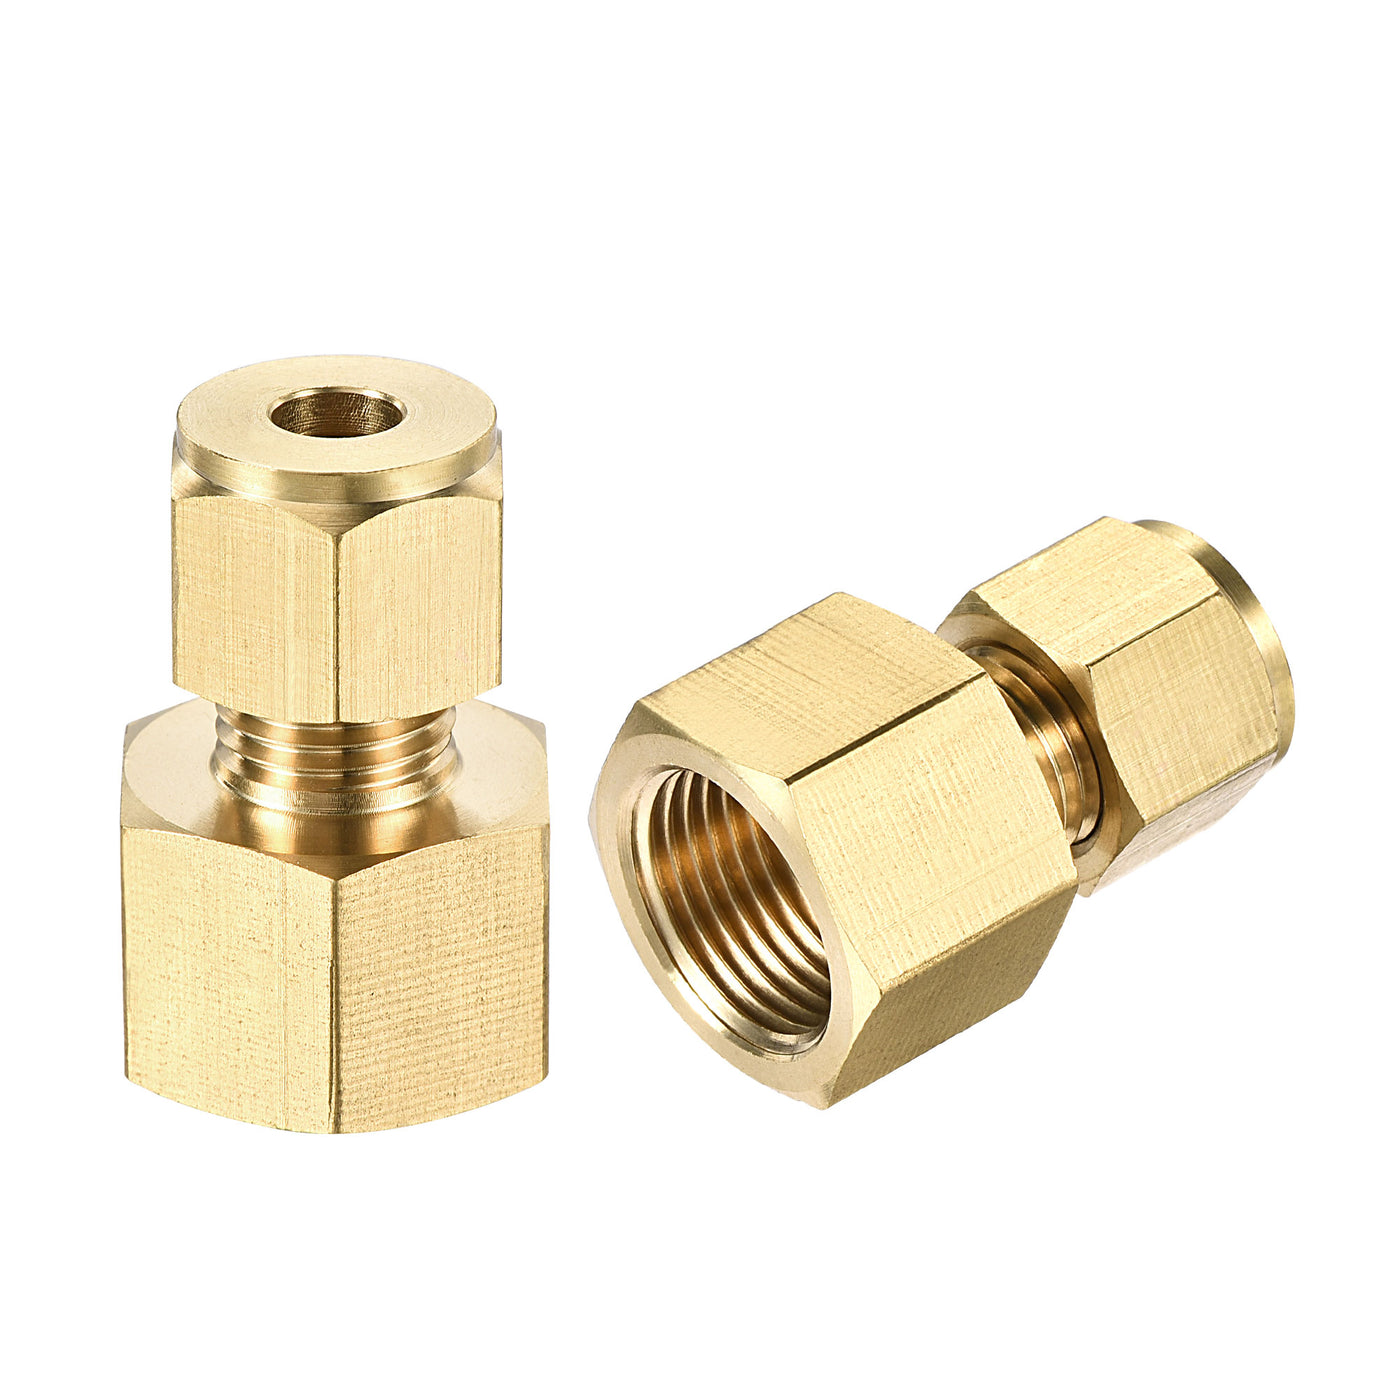 Uxcell Uxcell Compression Tube Fitting G3/8 Female Thread x 8mm Tube OD Straight Coupling Adapter Brass, 2pcs